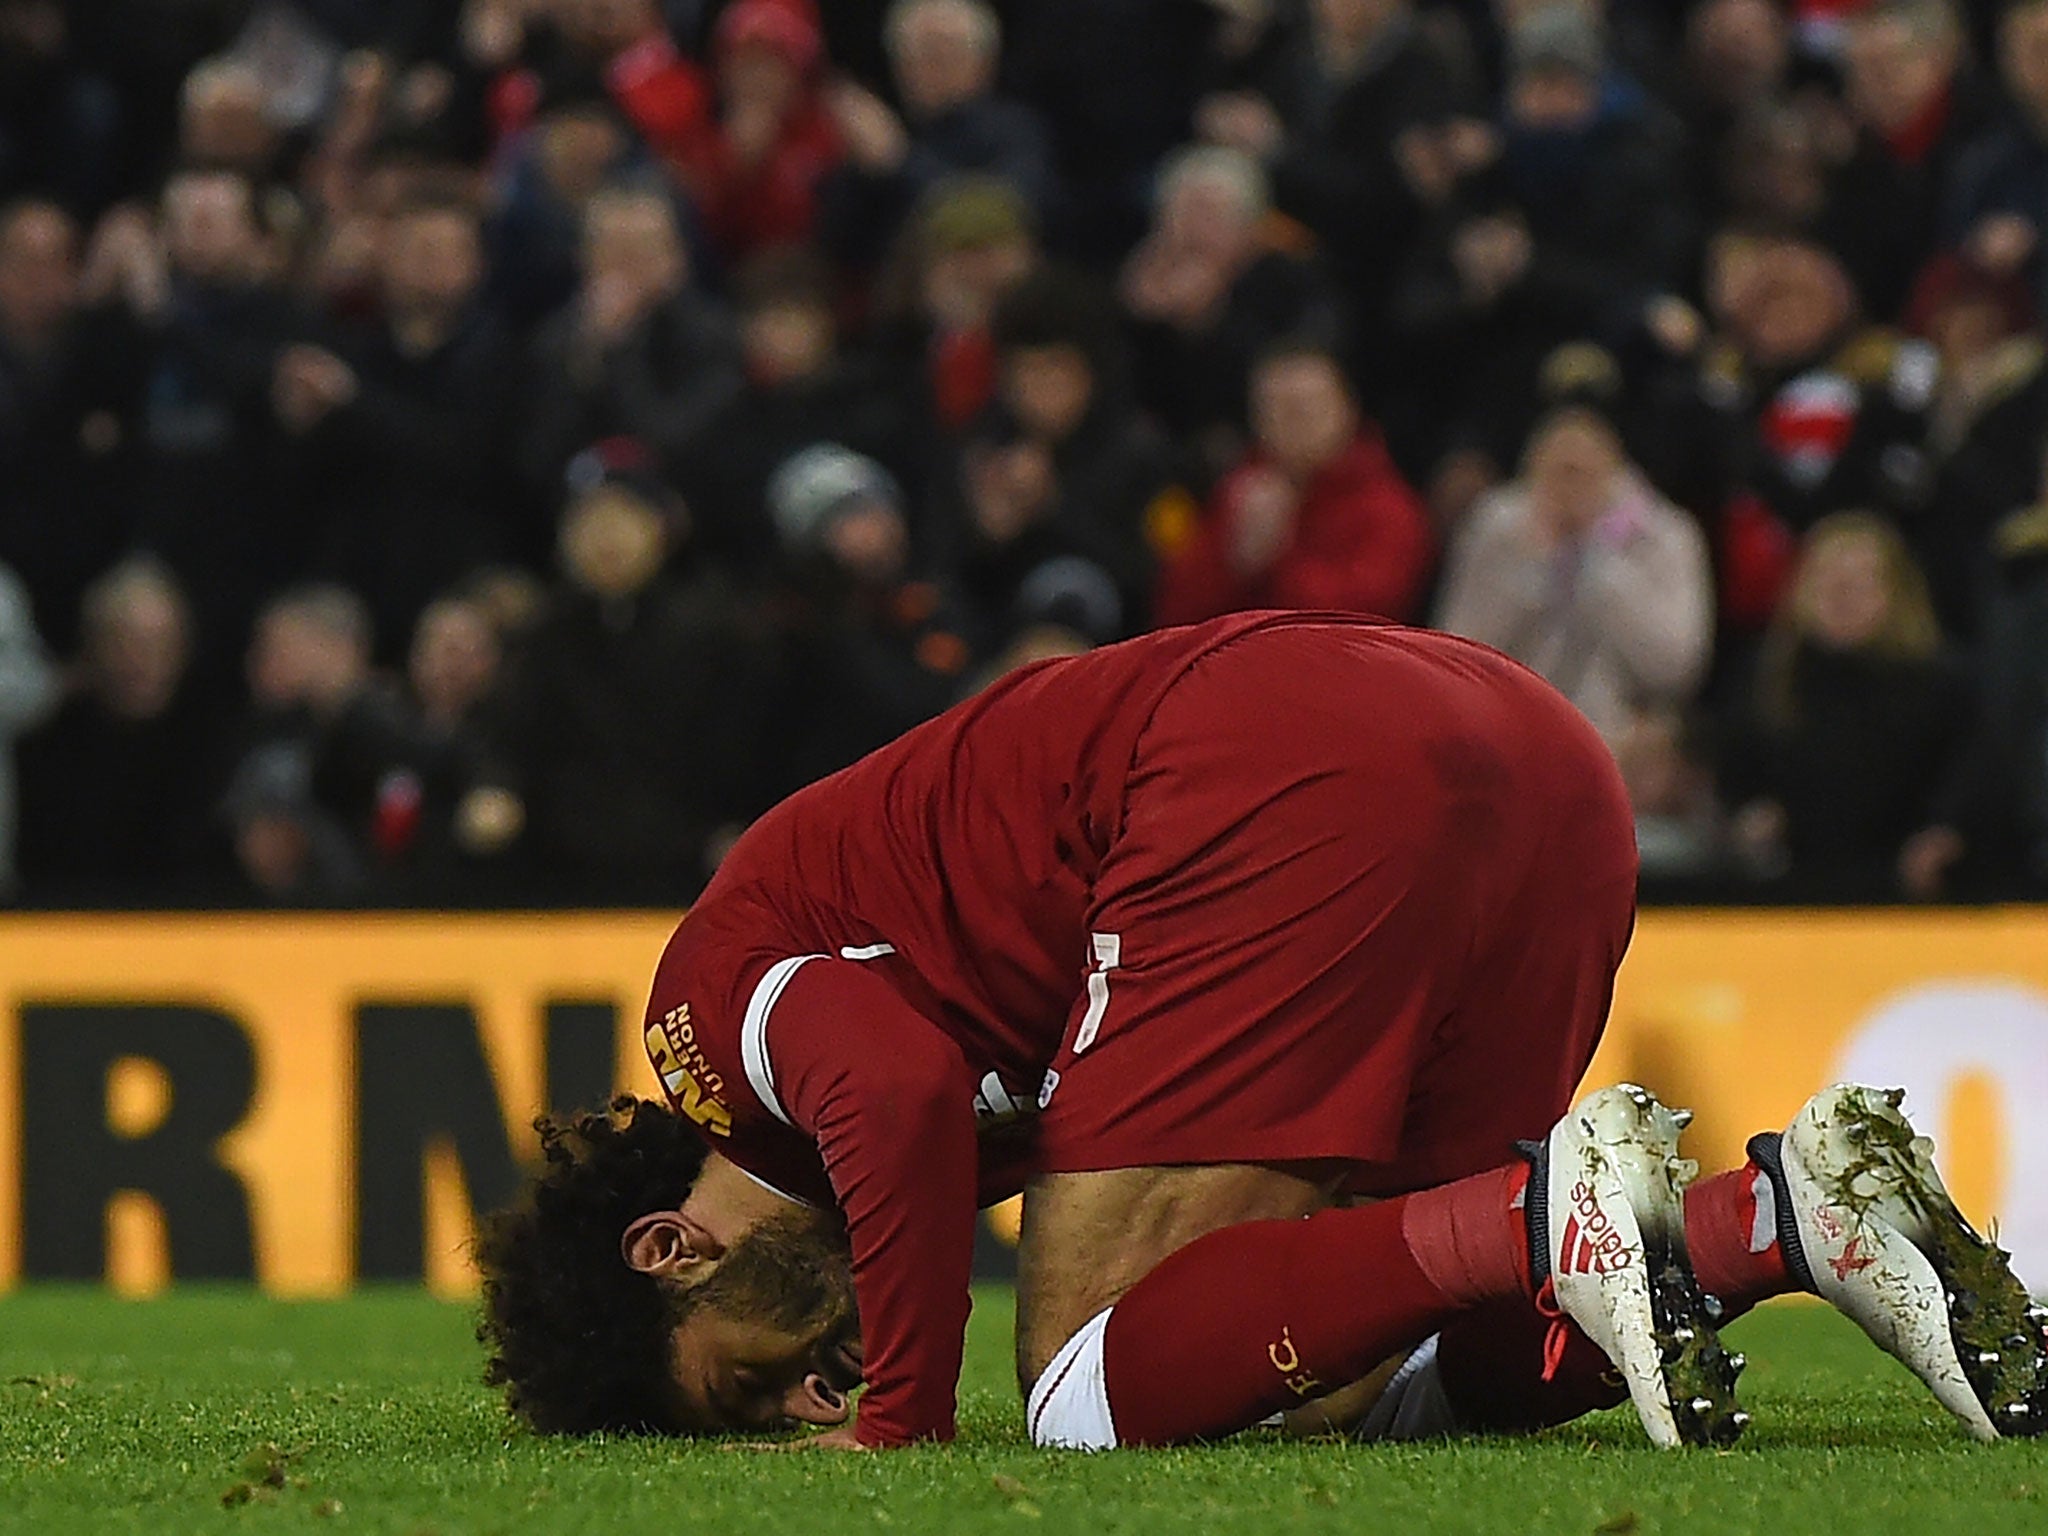 Mohammad Salah has helped to challenge perceptions of race and religion in football